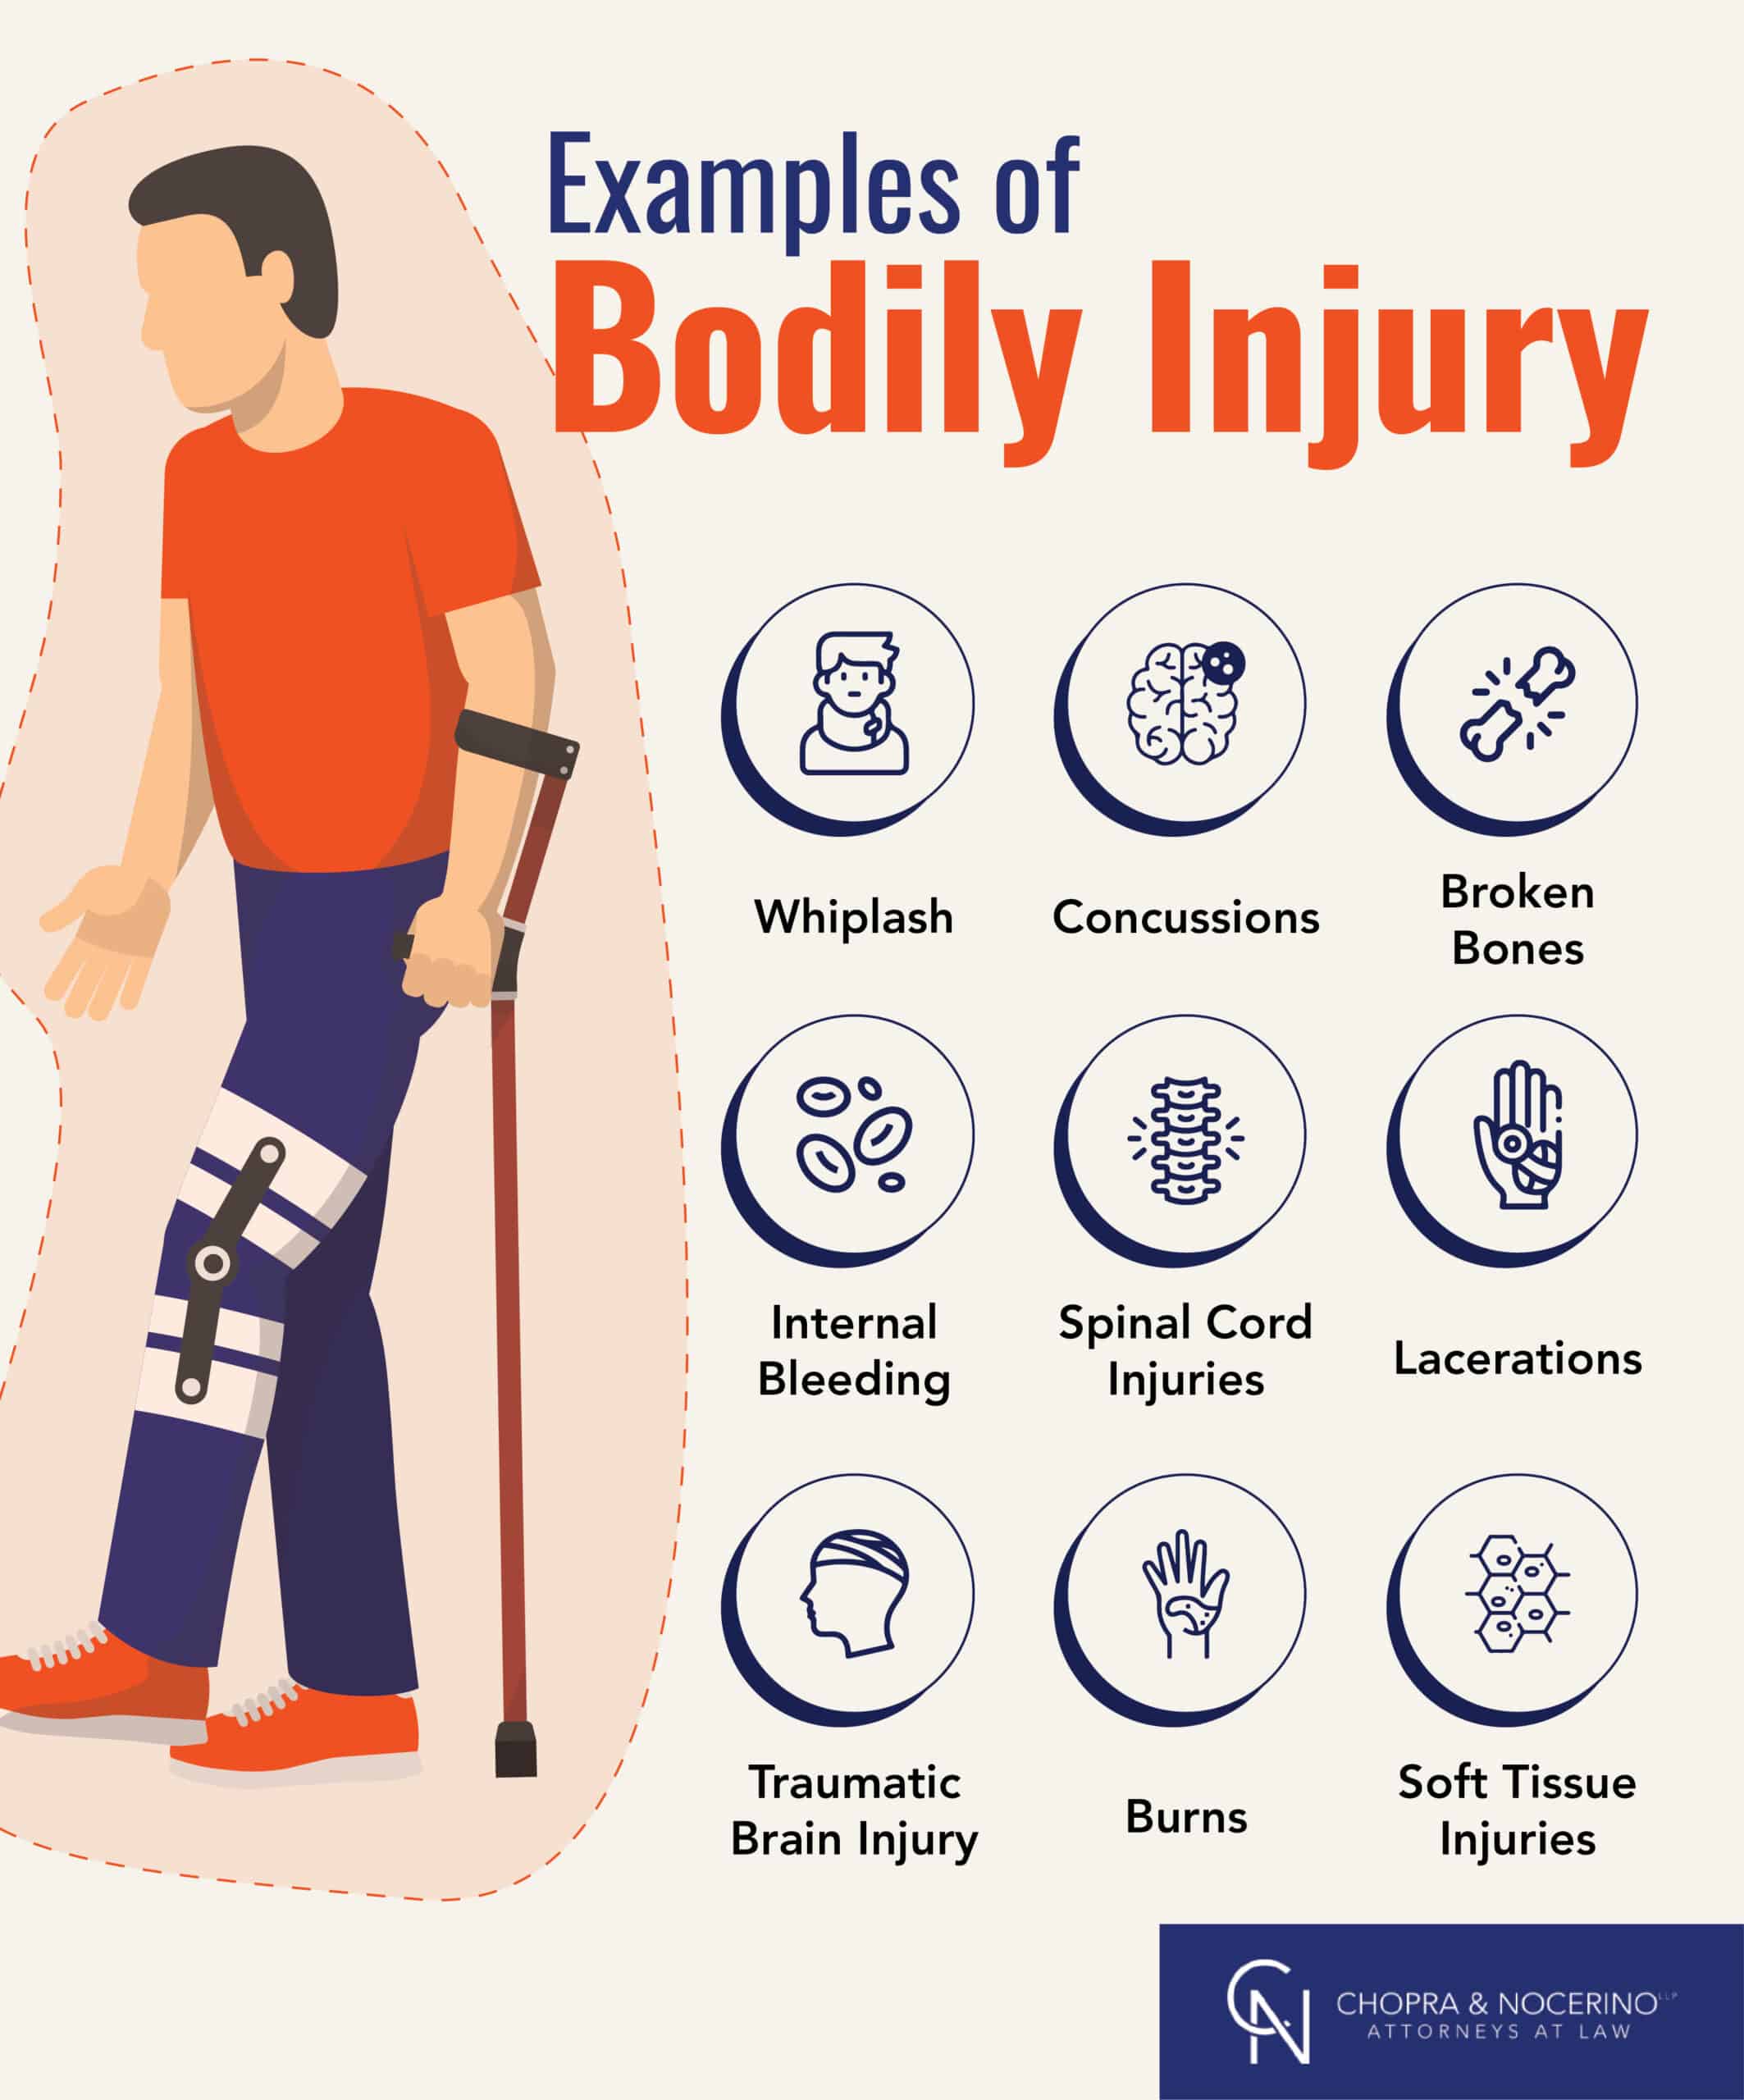 Examples of bodily injuries graphic designed by Chopra & Nocerino